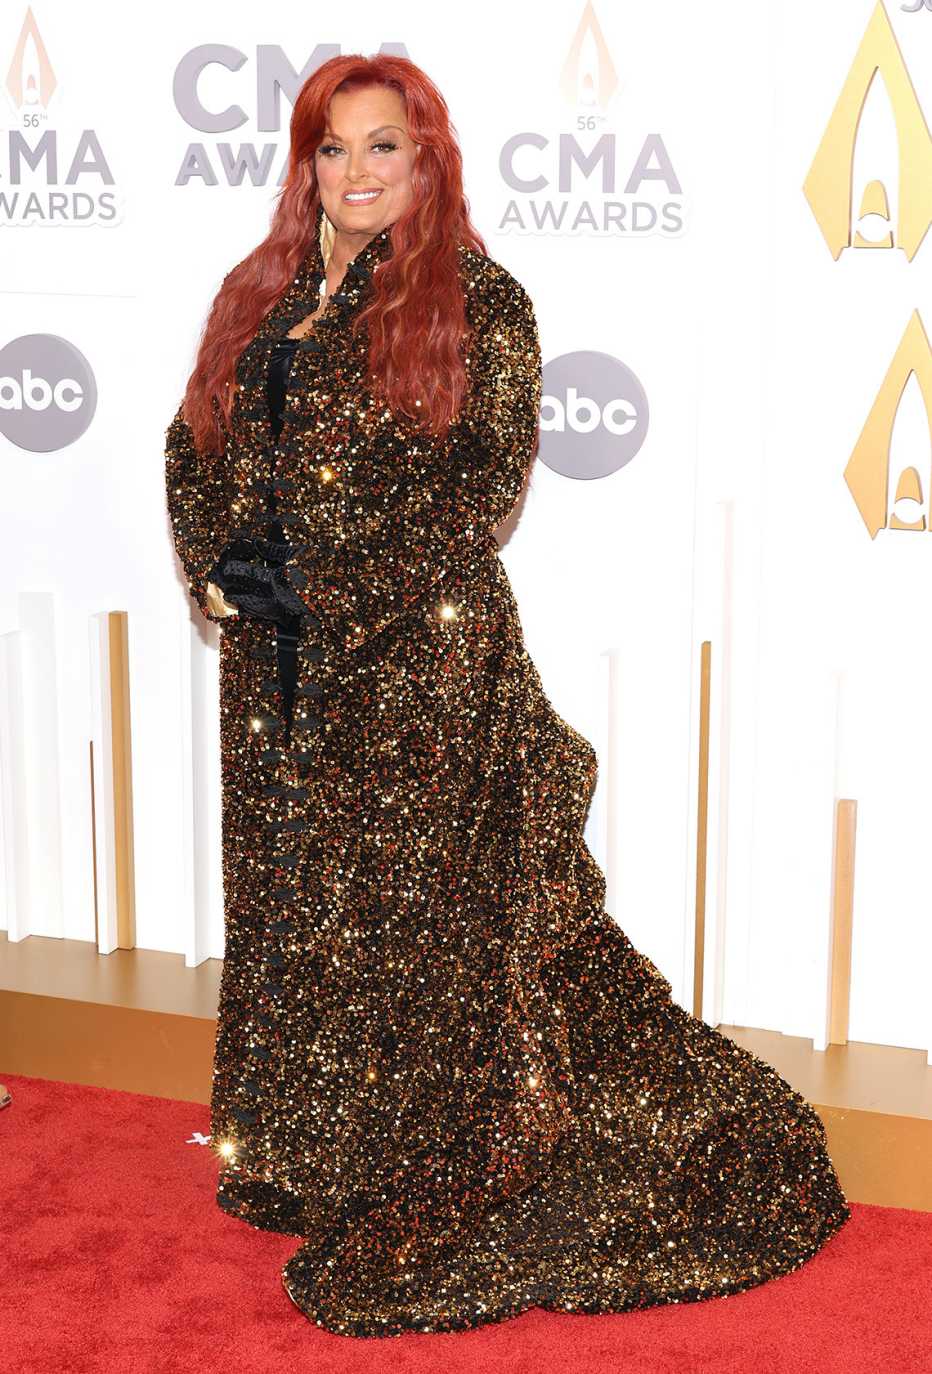 Wynonna Judd on the red carpet in a shimmery gold dress at the 56th annual CMA Awards